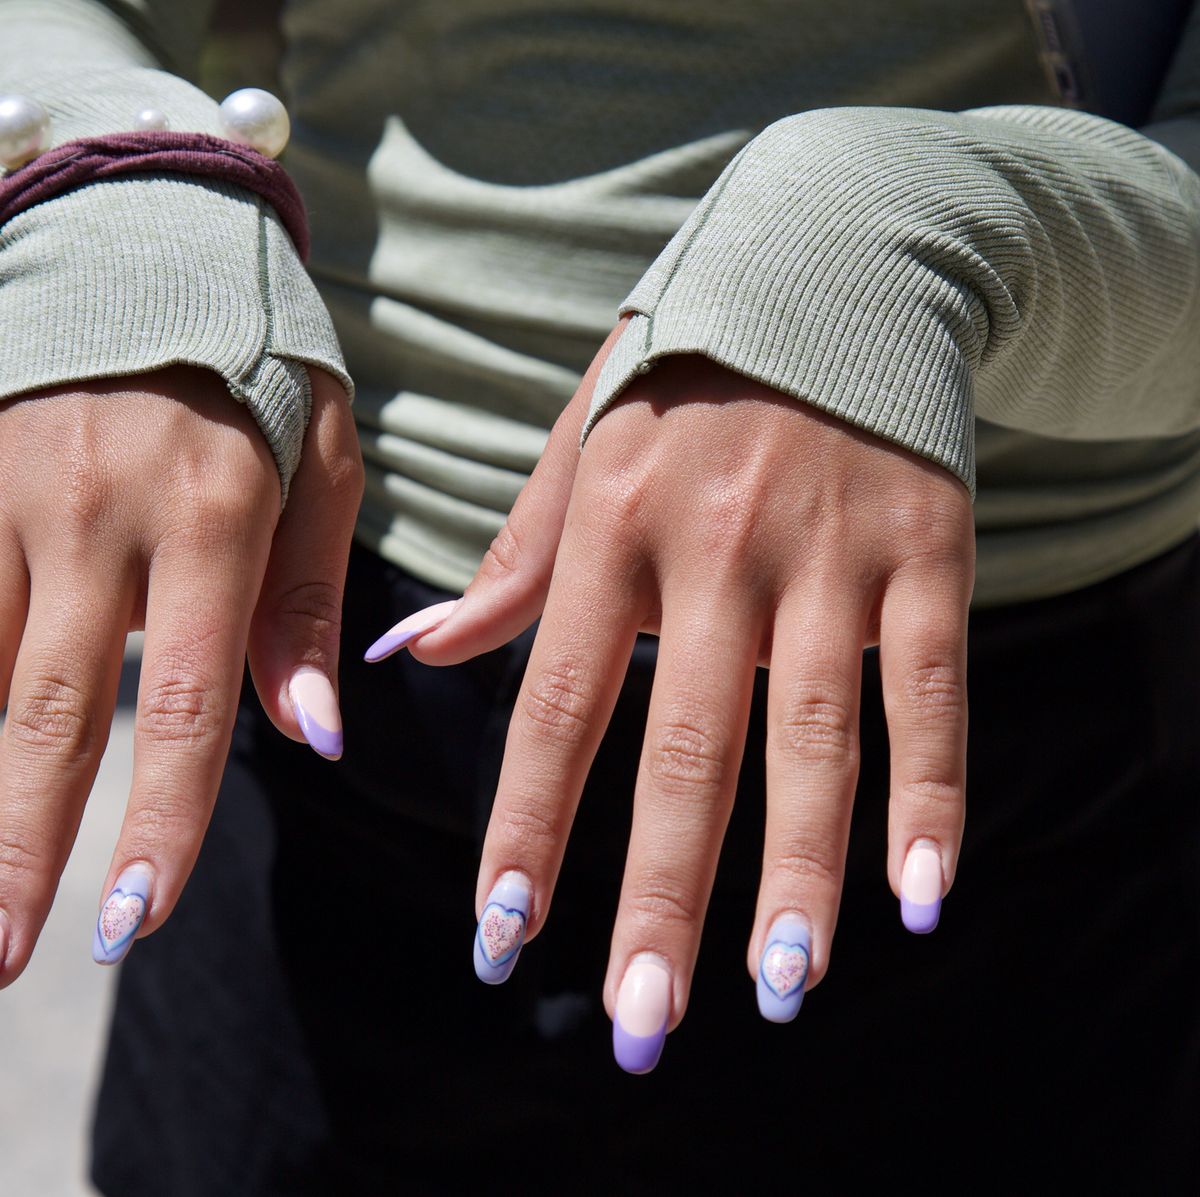 What Manicure Style Is Right For You: Gel, Shellac or Acrylics?